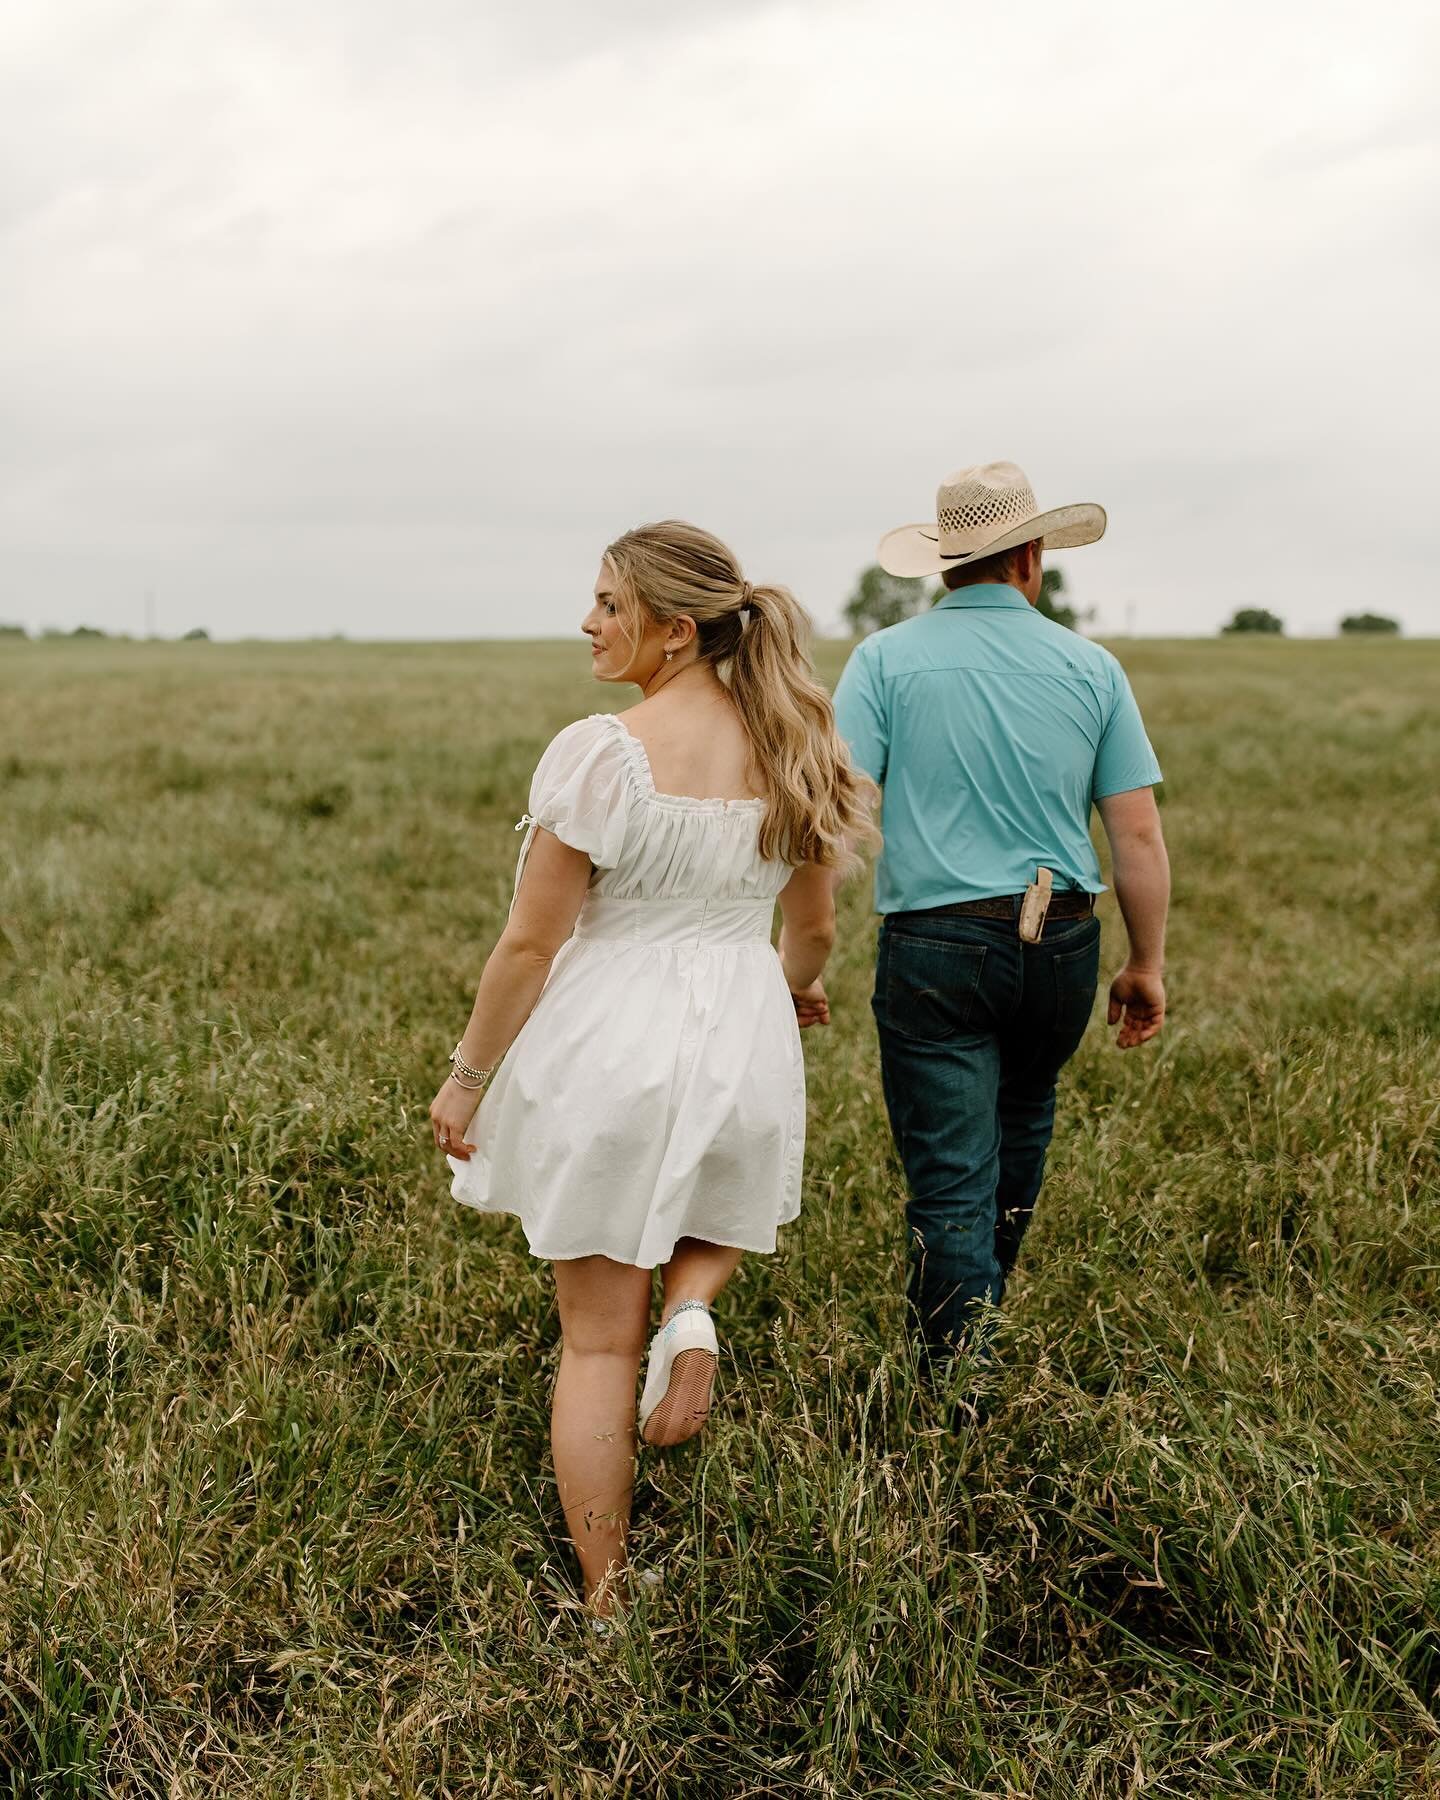 Caxton and Garrett ✨ the sun might not have made an appearance but they were shining bright⁣
⁣
#engaged #engagements #love #countrylove #westernlove #westernstyle #western #soontobemrs #wife #husband #ranchwedding #ranchweddings #texas #tx #texaswedd